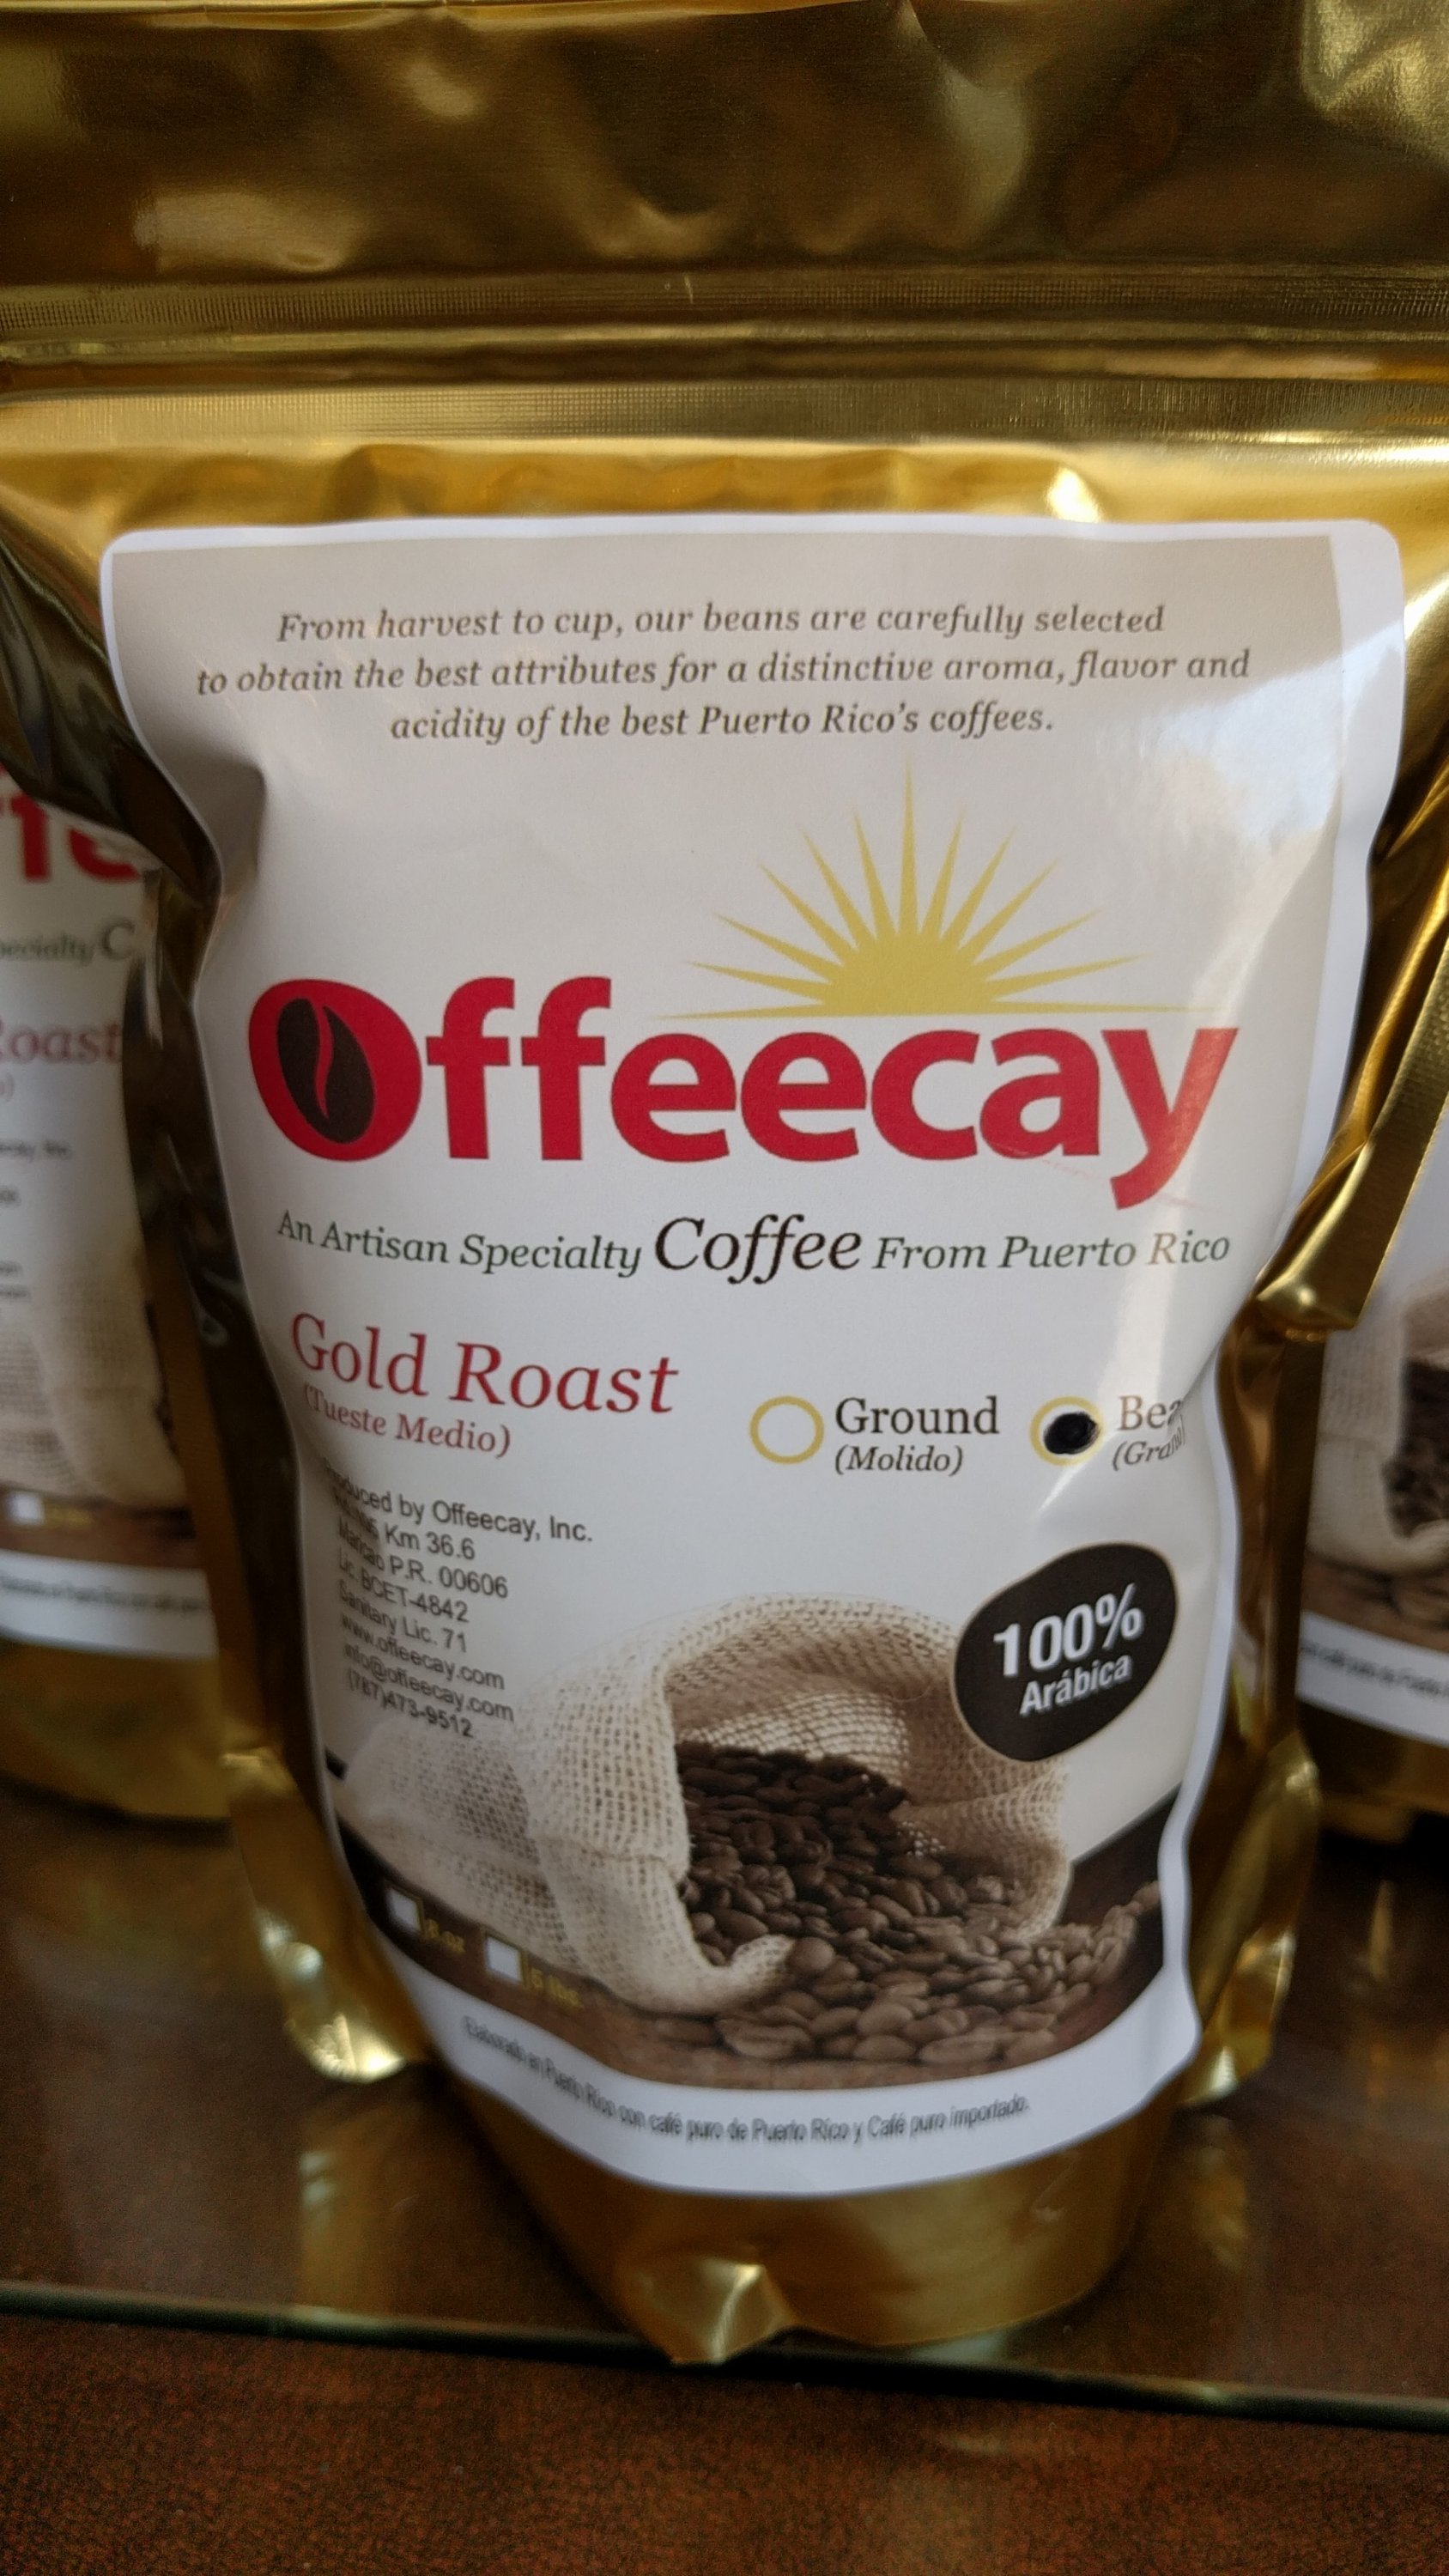 Pack of coffee beans